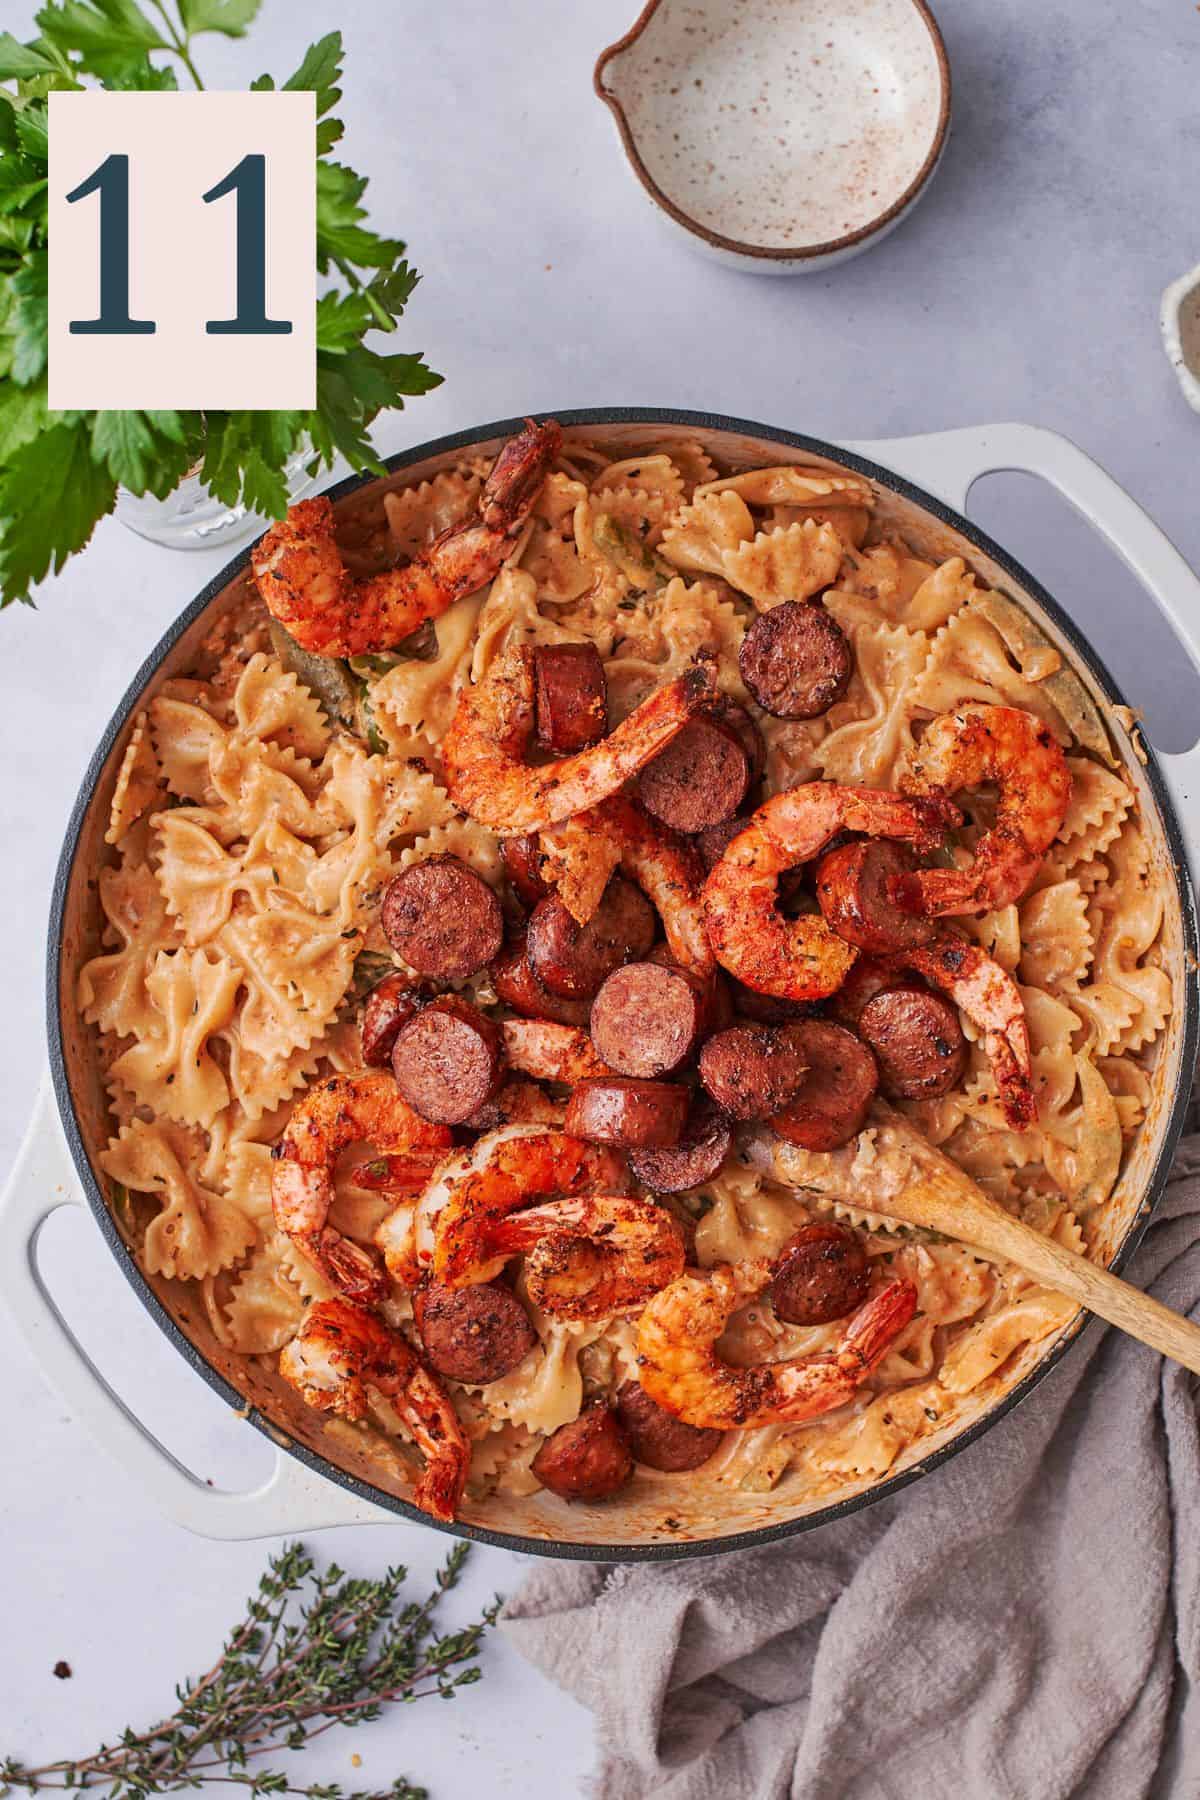 cooked sausage and shrimp added to pasta.